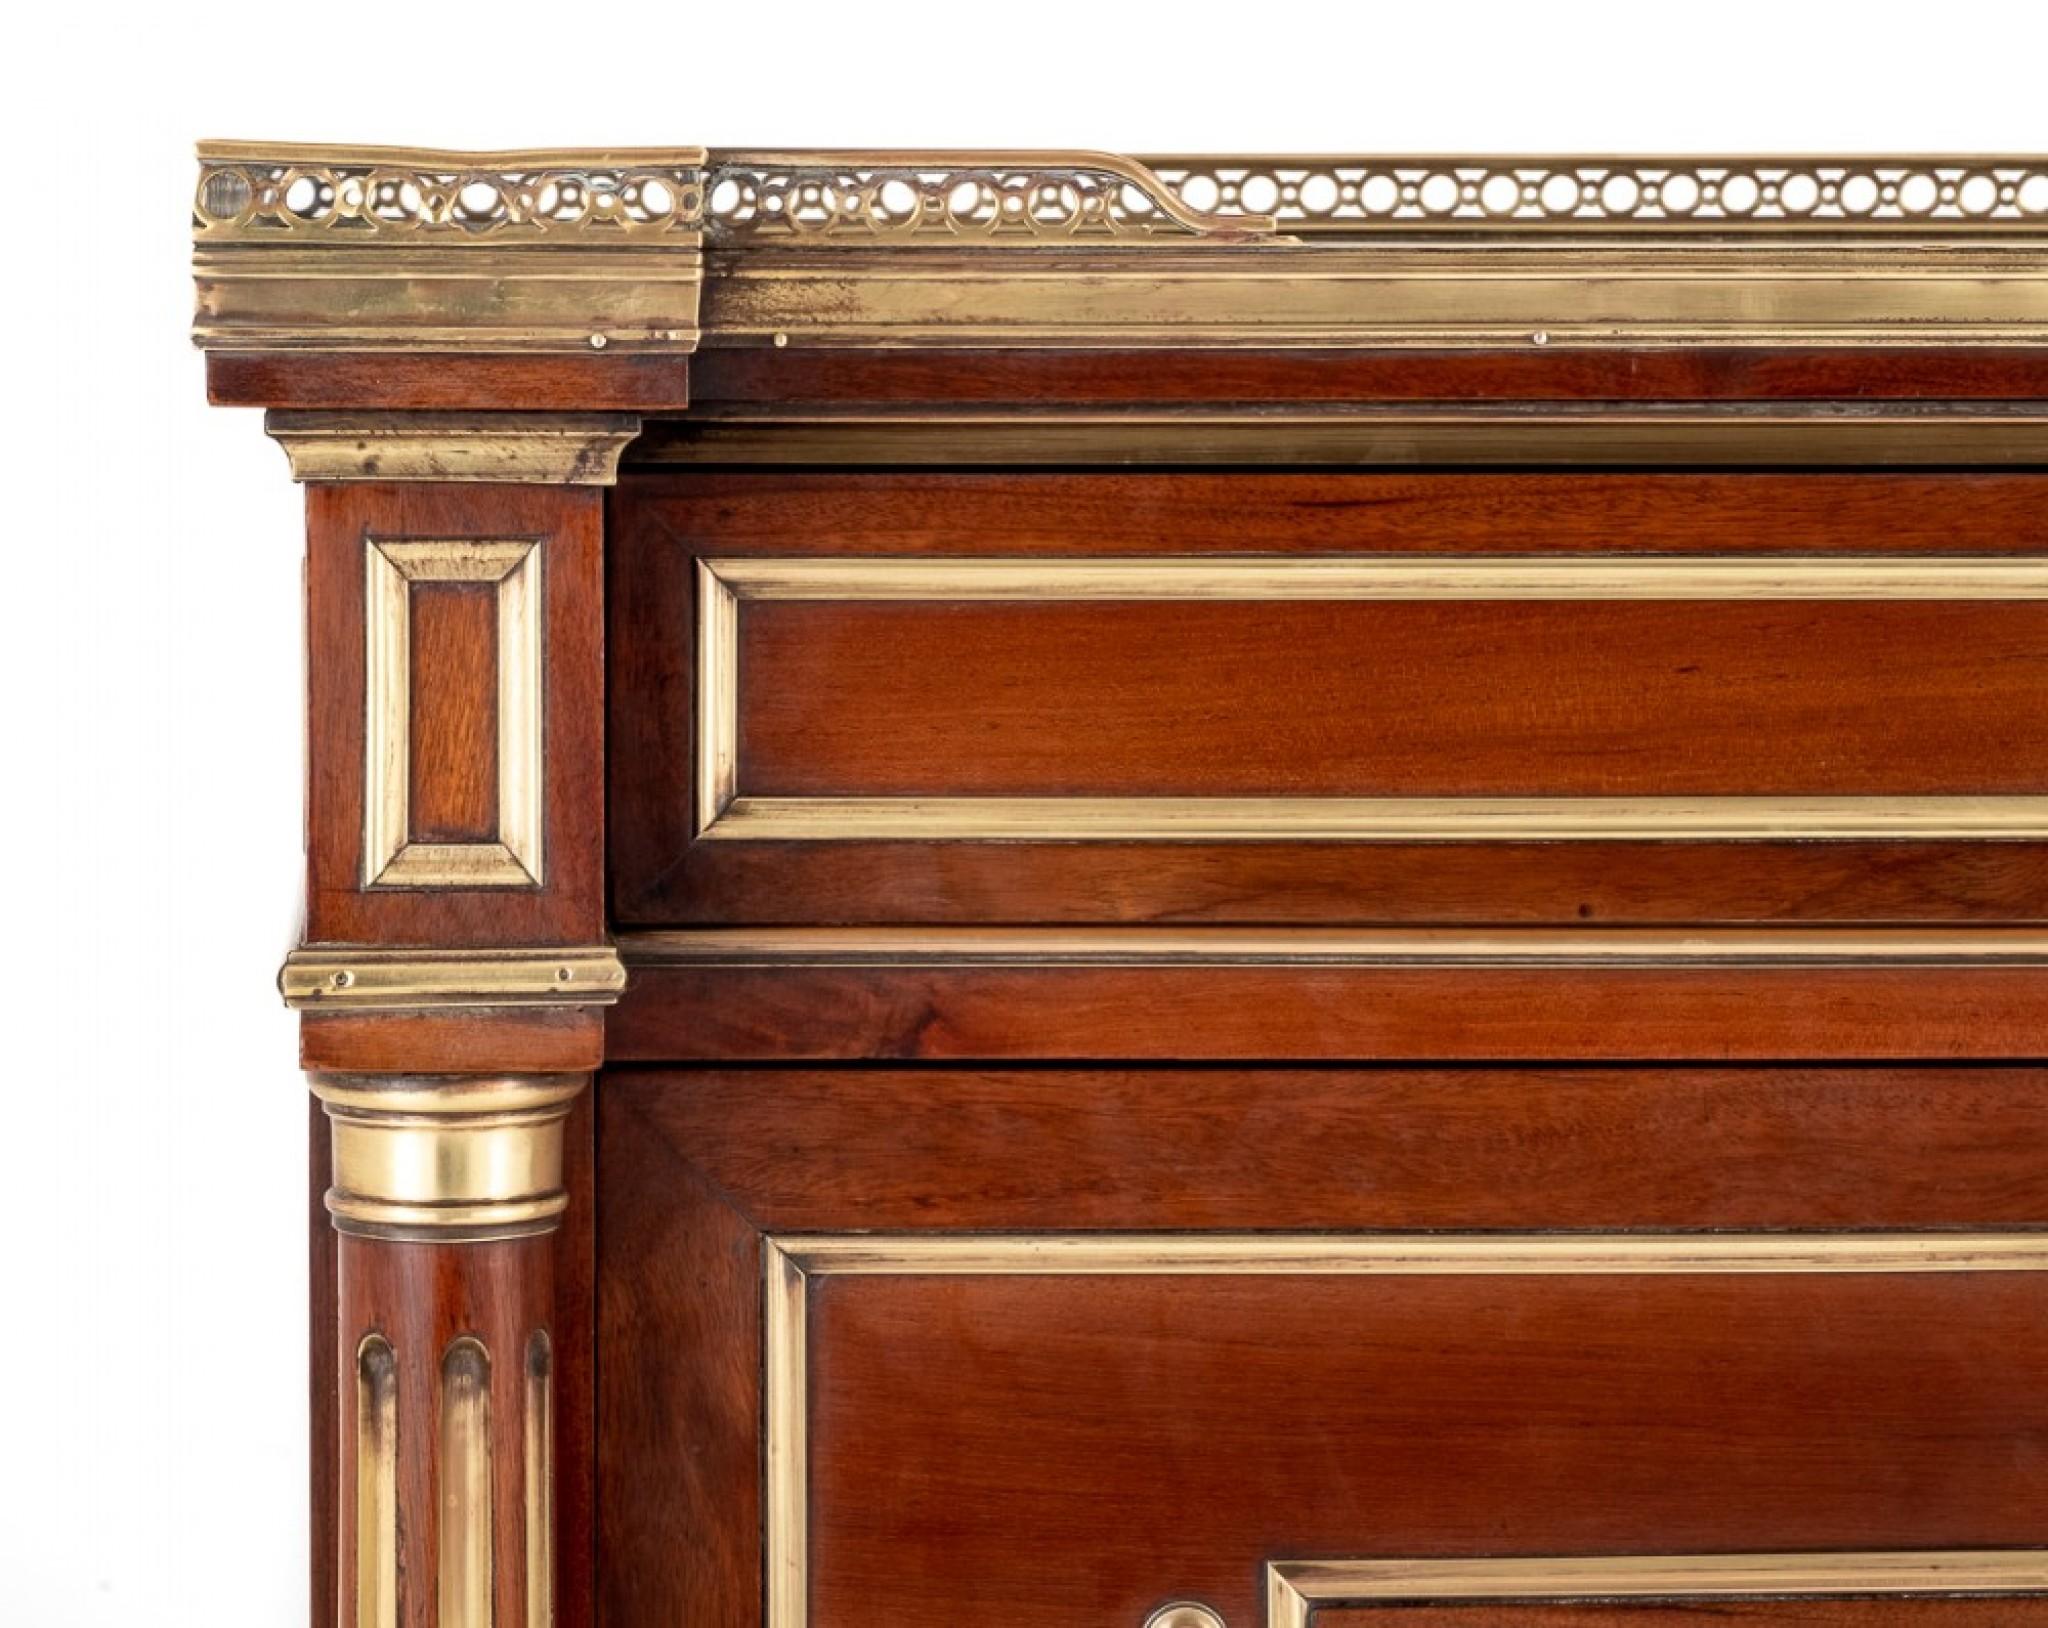 French Mahogany Escritoire.
Circa 1860
This Escritoire Stands Upon Turned Feet.
Having Fluted Turned Columns, 3 Lower Oak Lined Drawers and 1 Upper Mahogany Lined Drawer.
The Writing Fall Opens to Reveal an Arrangement of Drawers, Pigeonholes